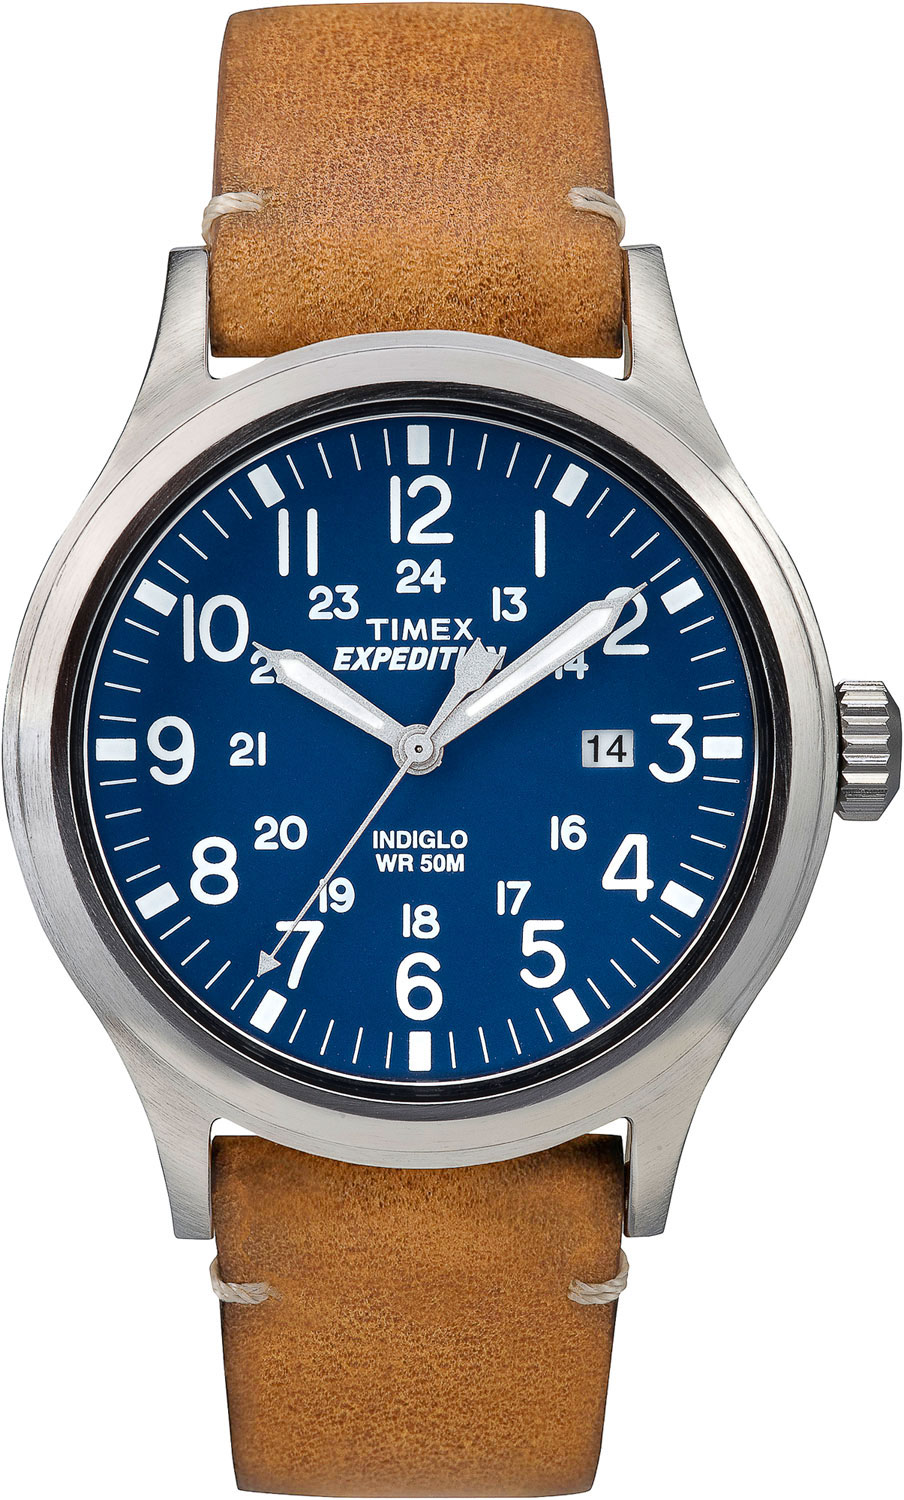   Timex Expedition TW4B01800